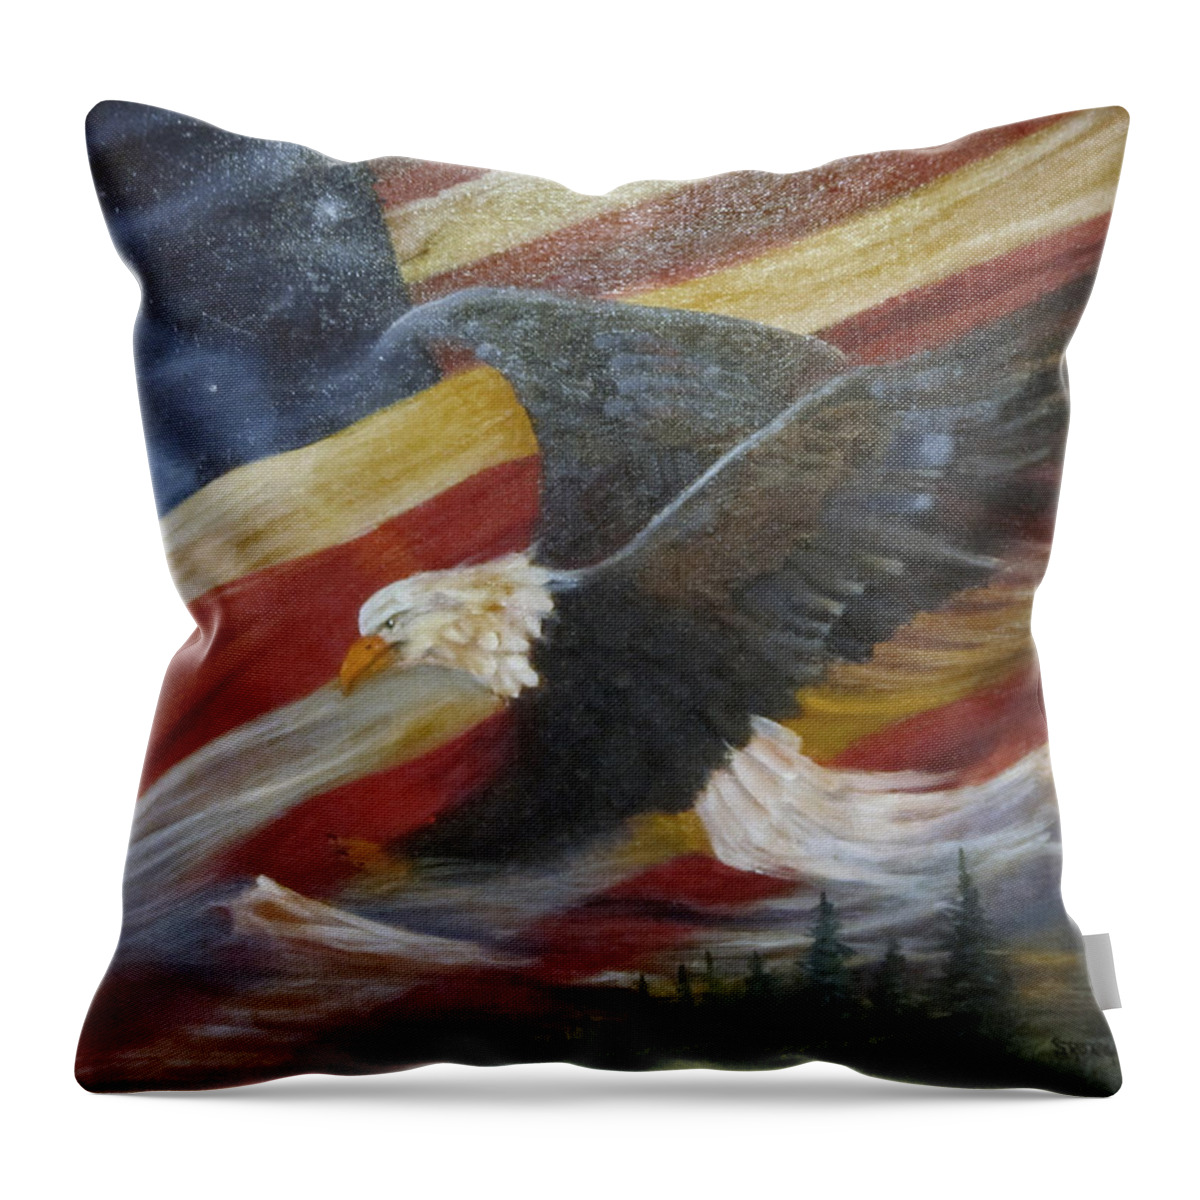 Curvismo Throw Pillow featuring the painting American Glory by Sherry Strong